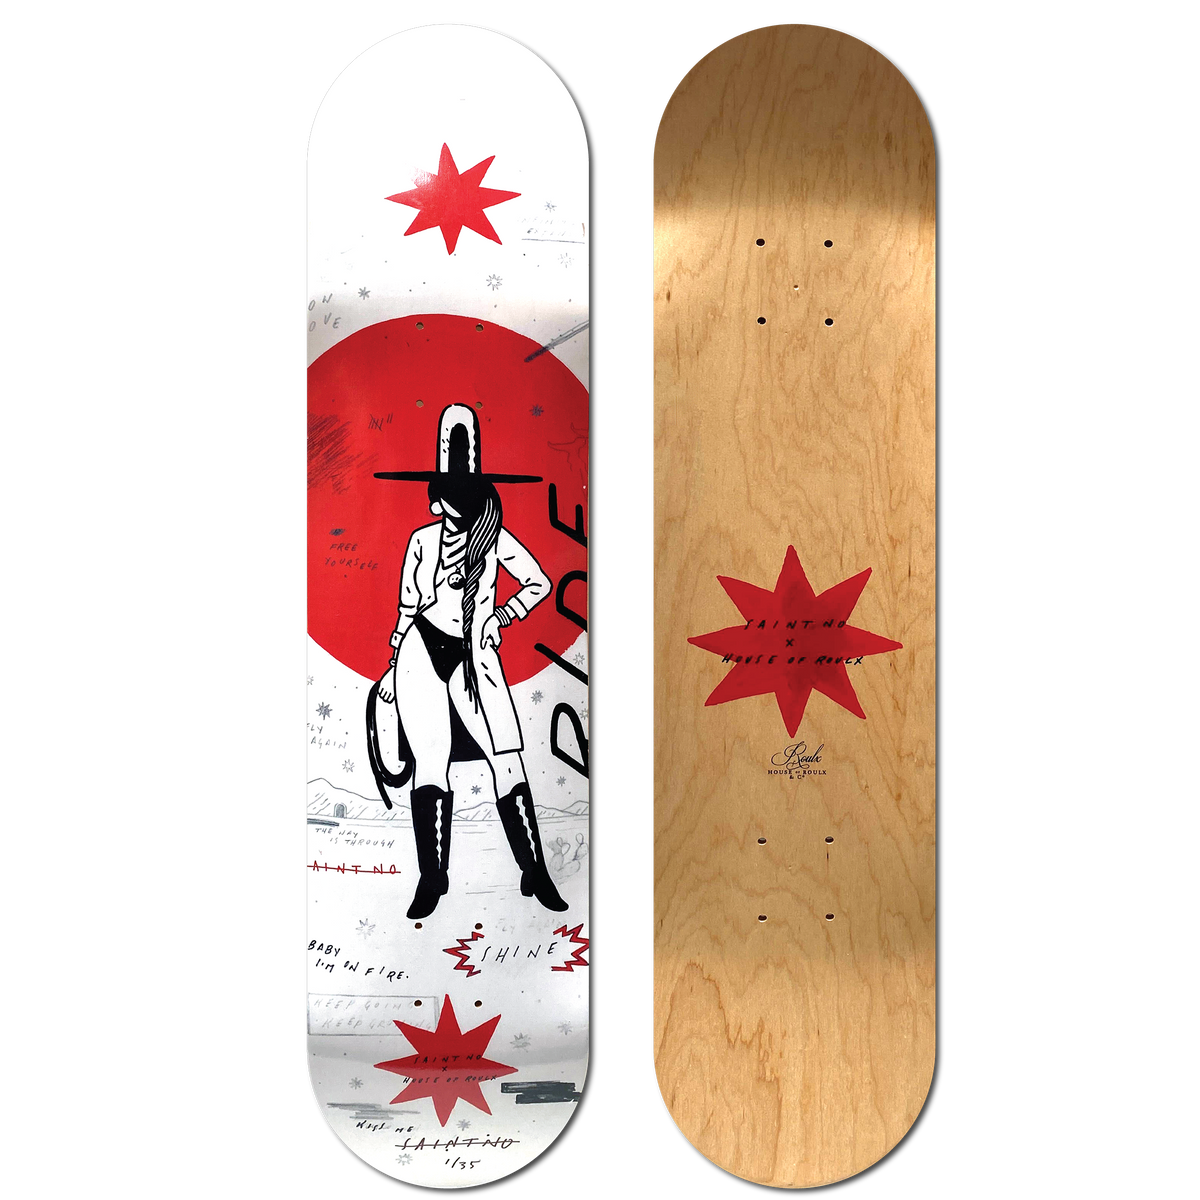 SAINT NO &quot;Cosmic Rider: Side A&quot; - Skate Deck, Limited Edition of 35